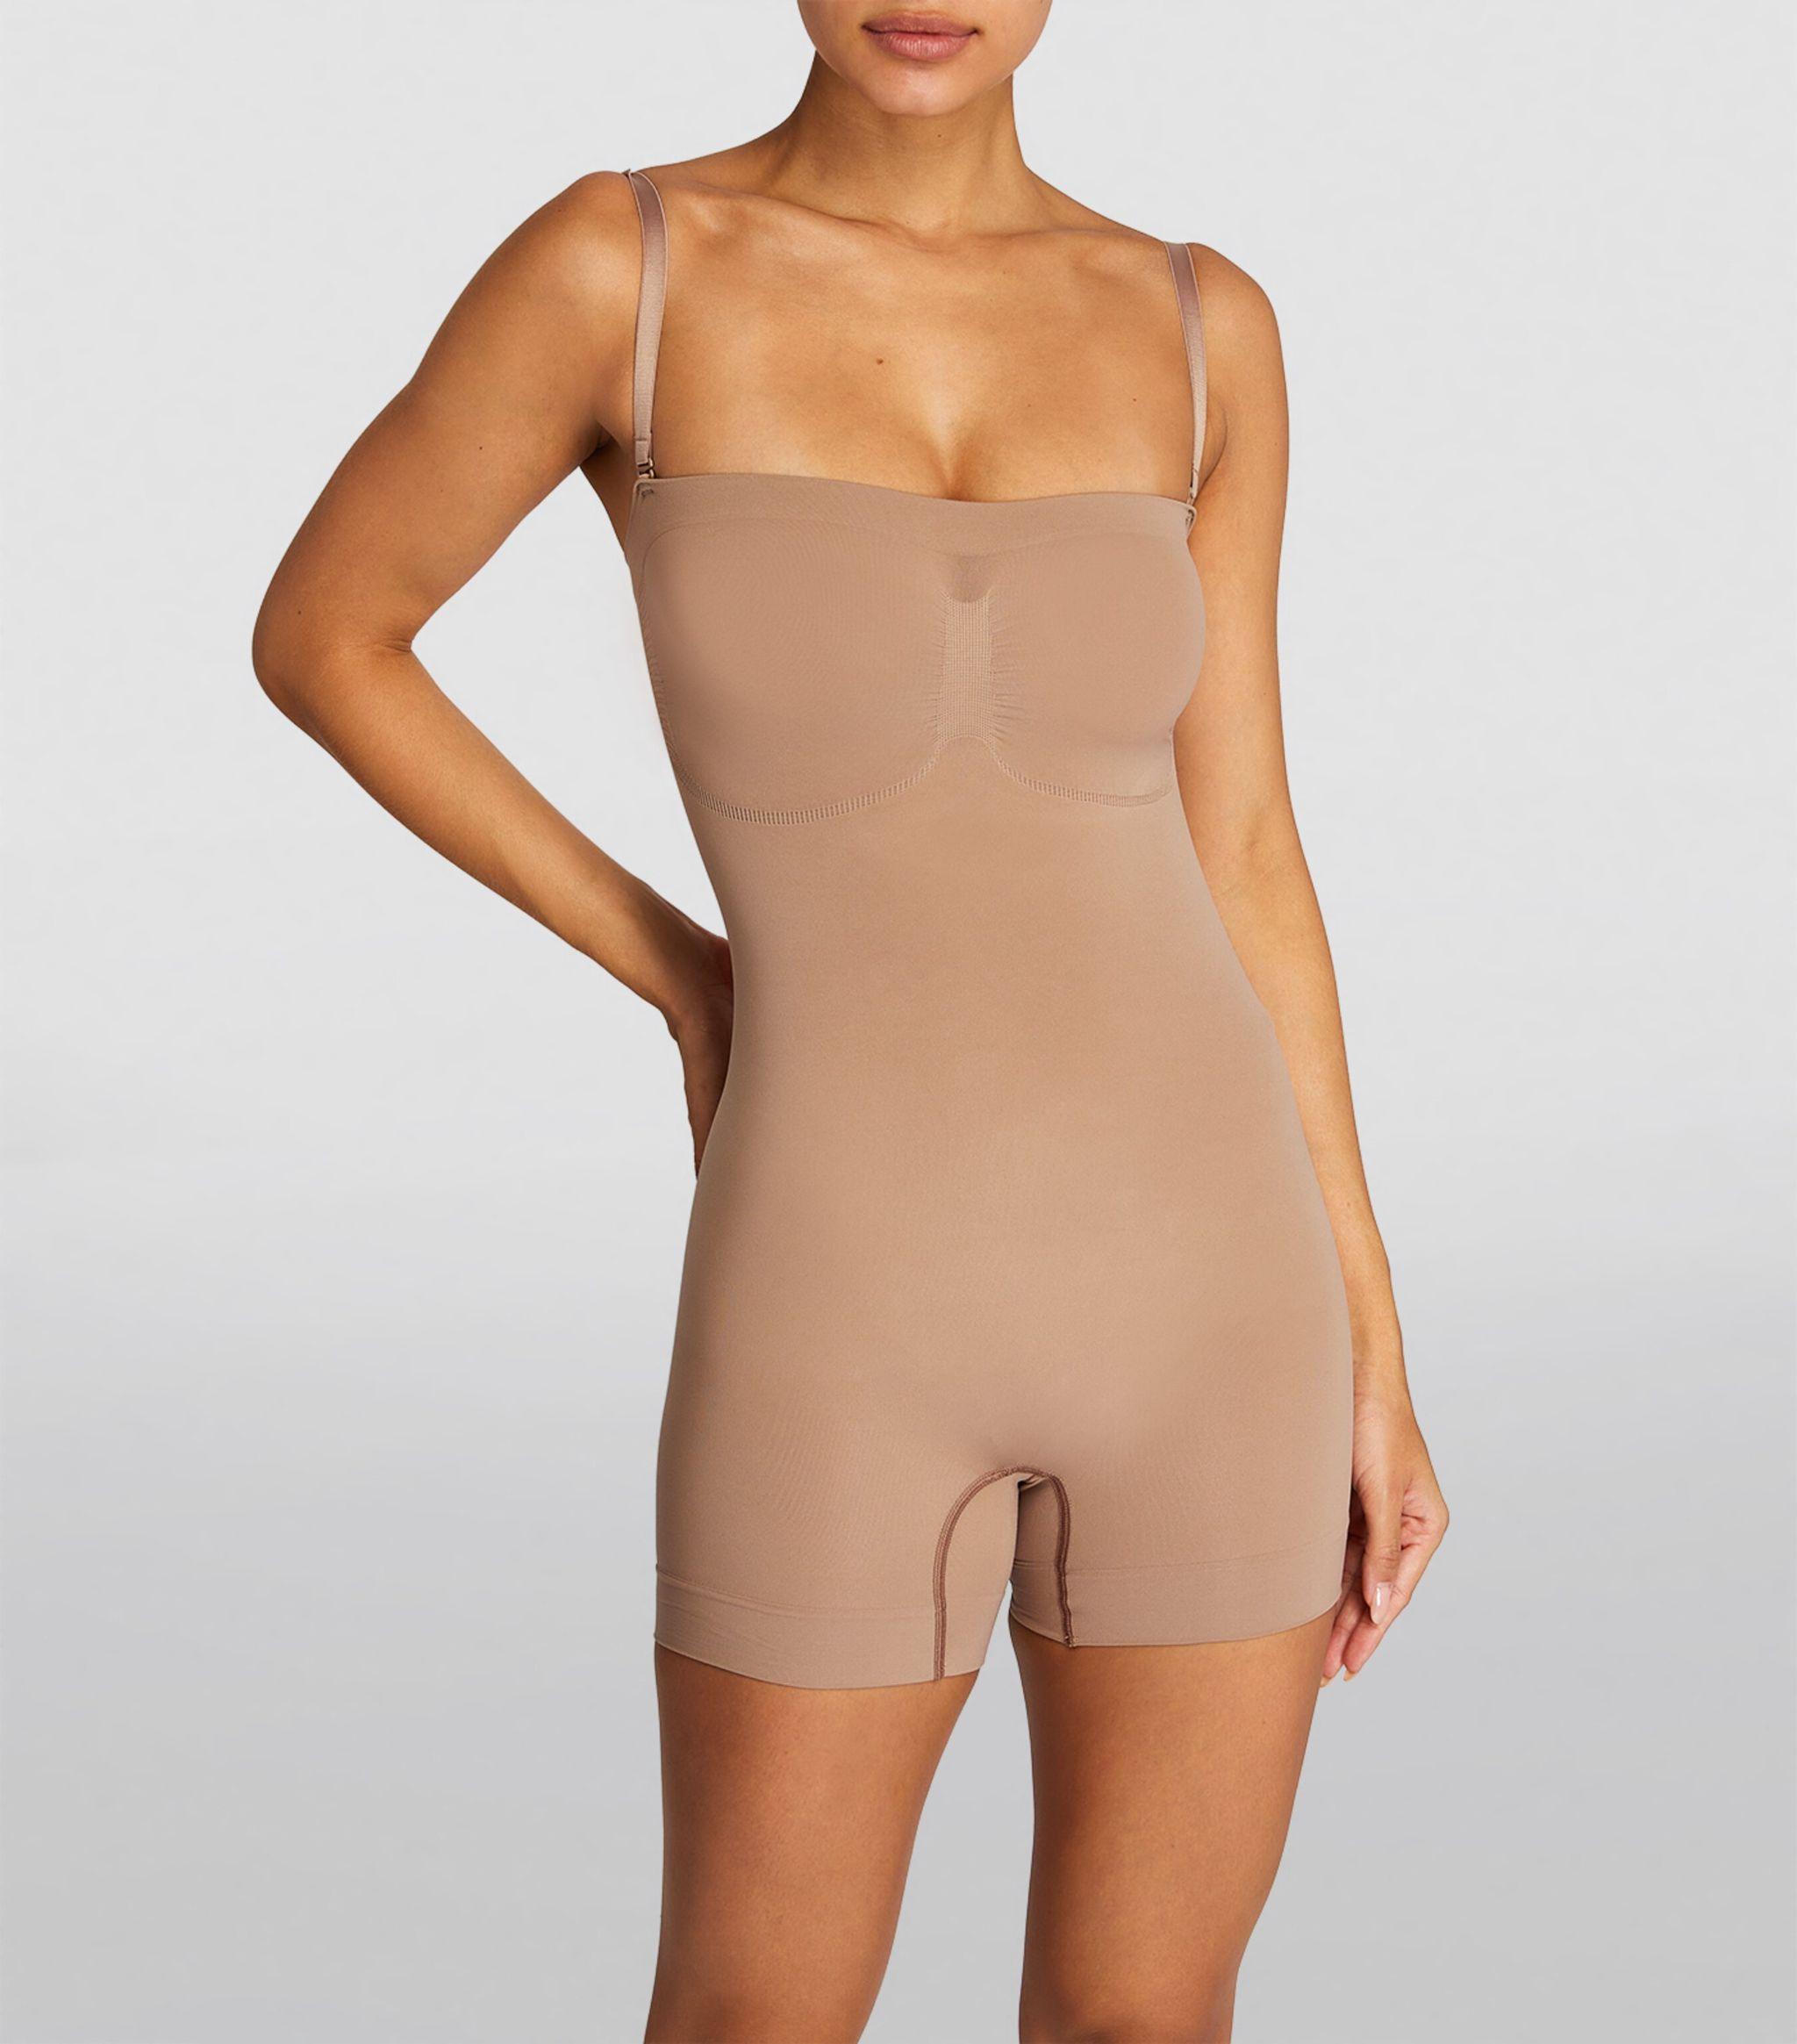 Buy SKIMS Brown Seamless Sculpt Strapless Mid Thigh Bodysuit for